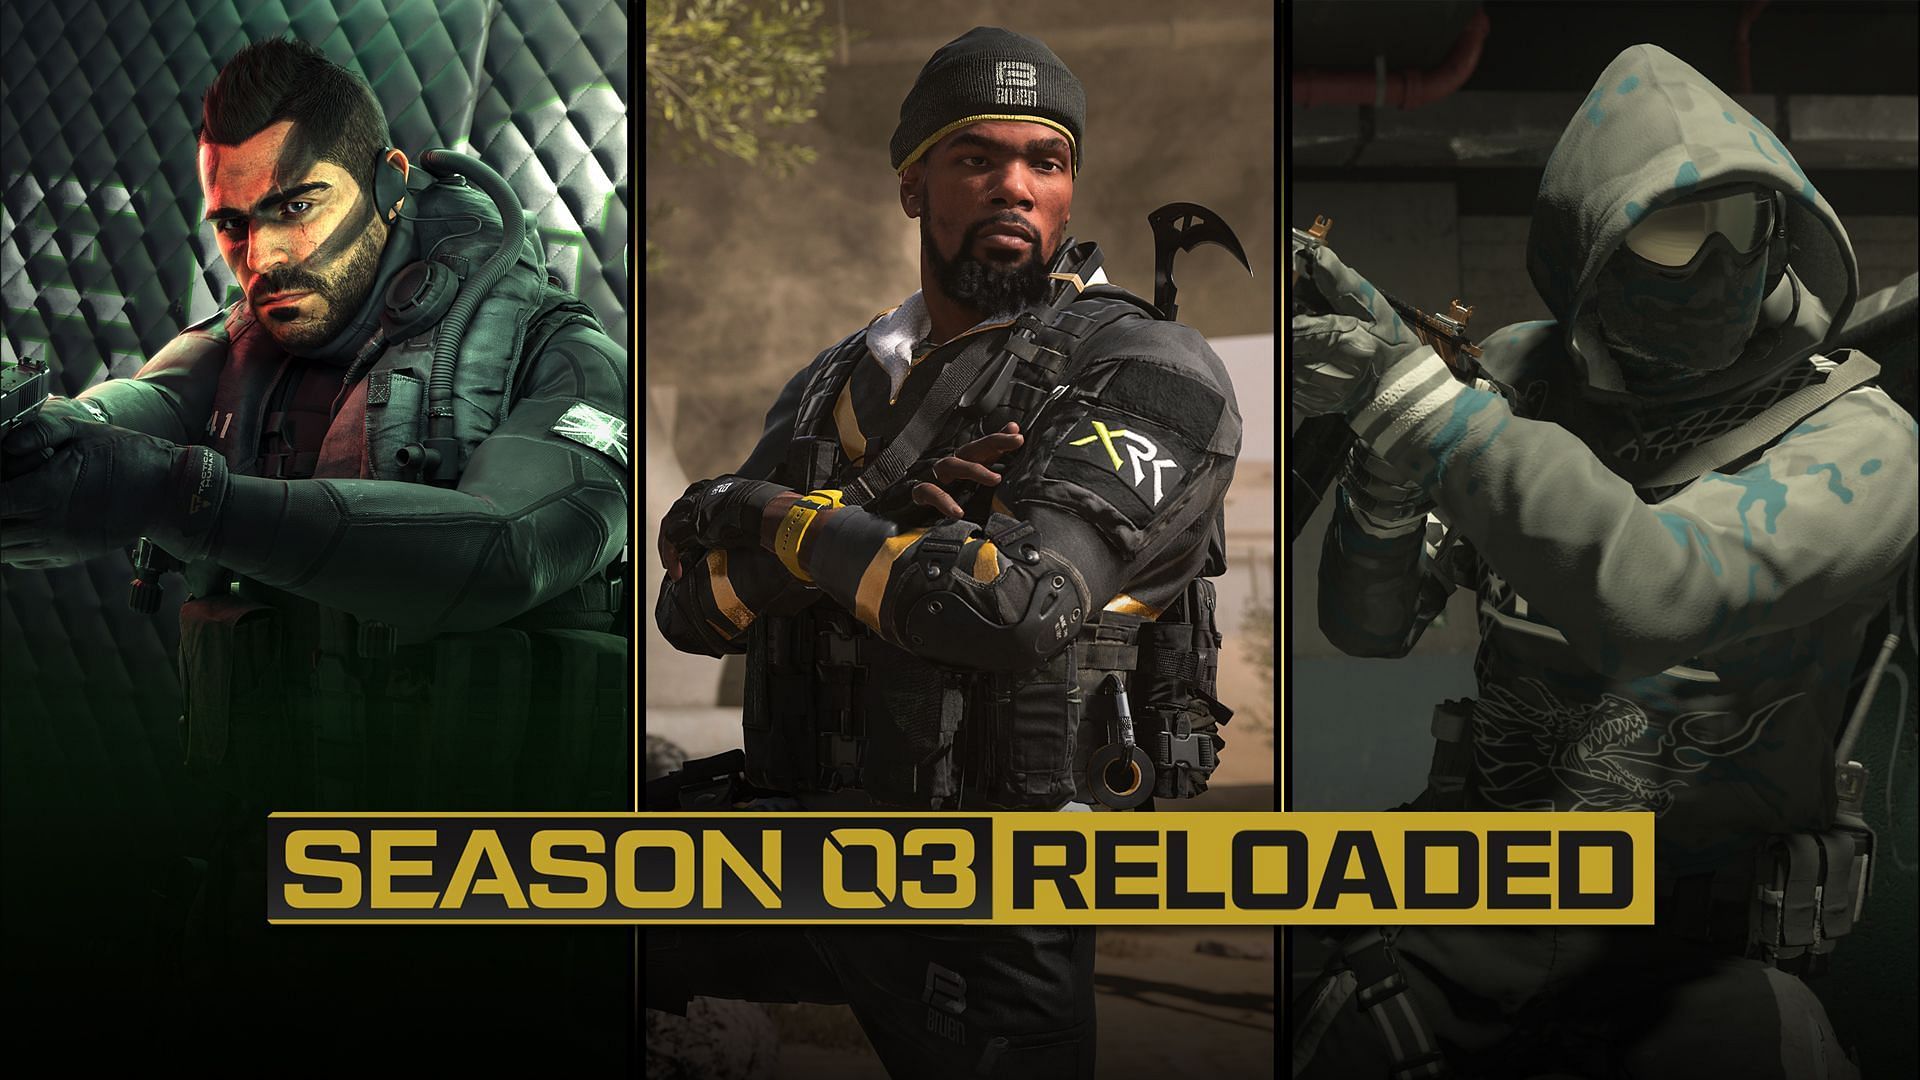 Season 3 Reloaded brings tons of weapon changes in Modern Warfare 2 and Warzone 2 (Image via Activision)